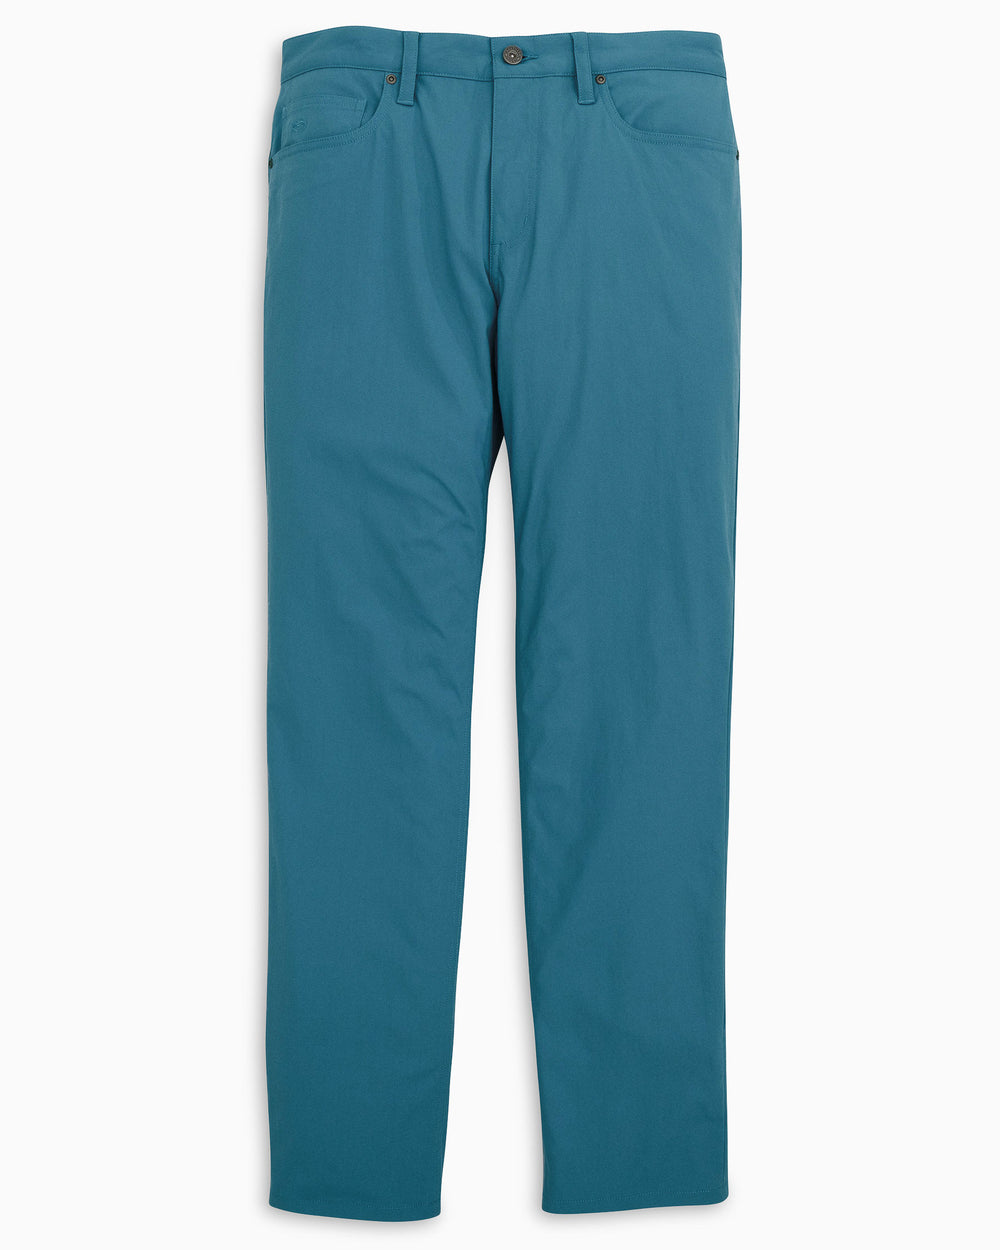 The front view of the Men's Intercoastal Pant by Southern Tide - Porto Blue